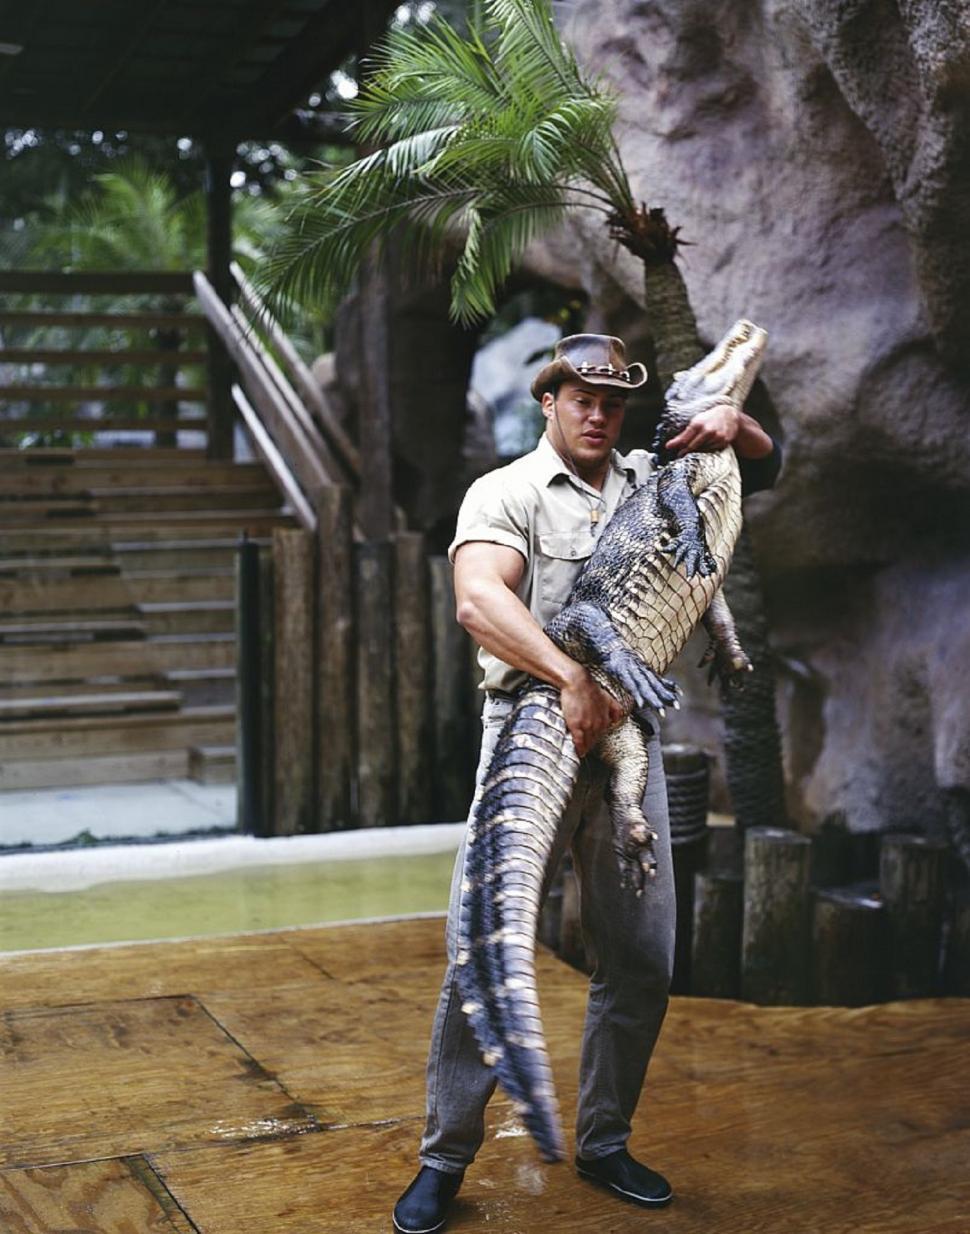 Free Image of Man Holding Large Alligator in Hands 